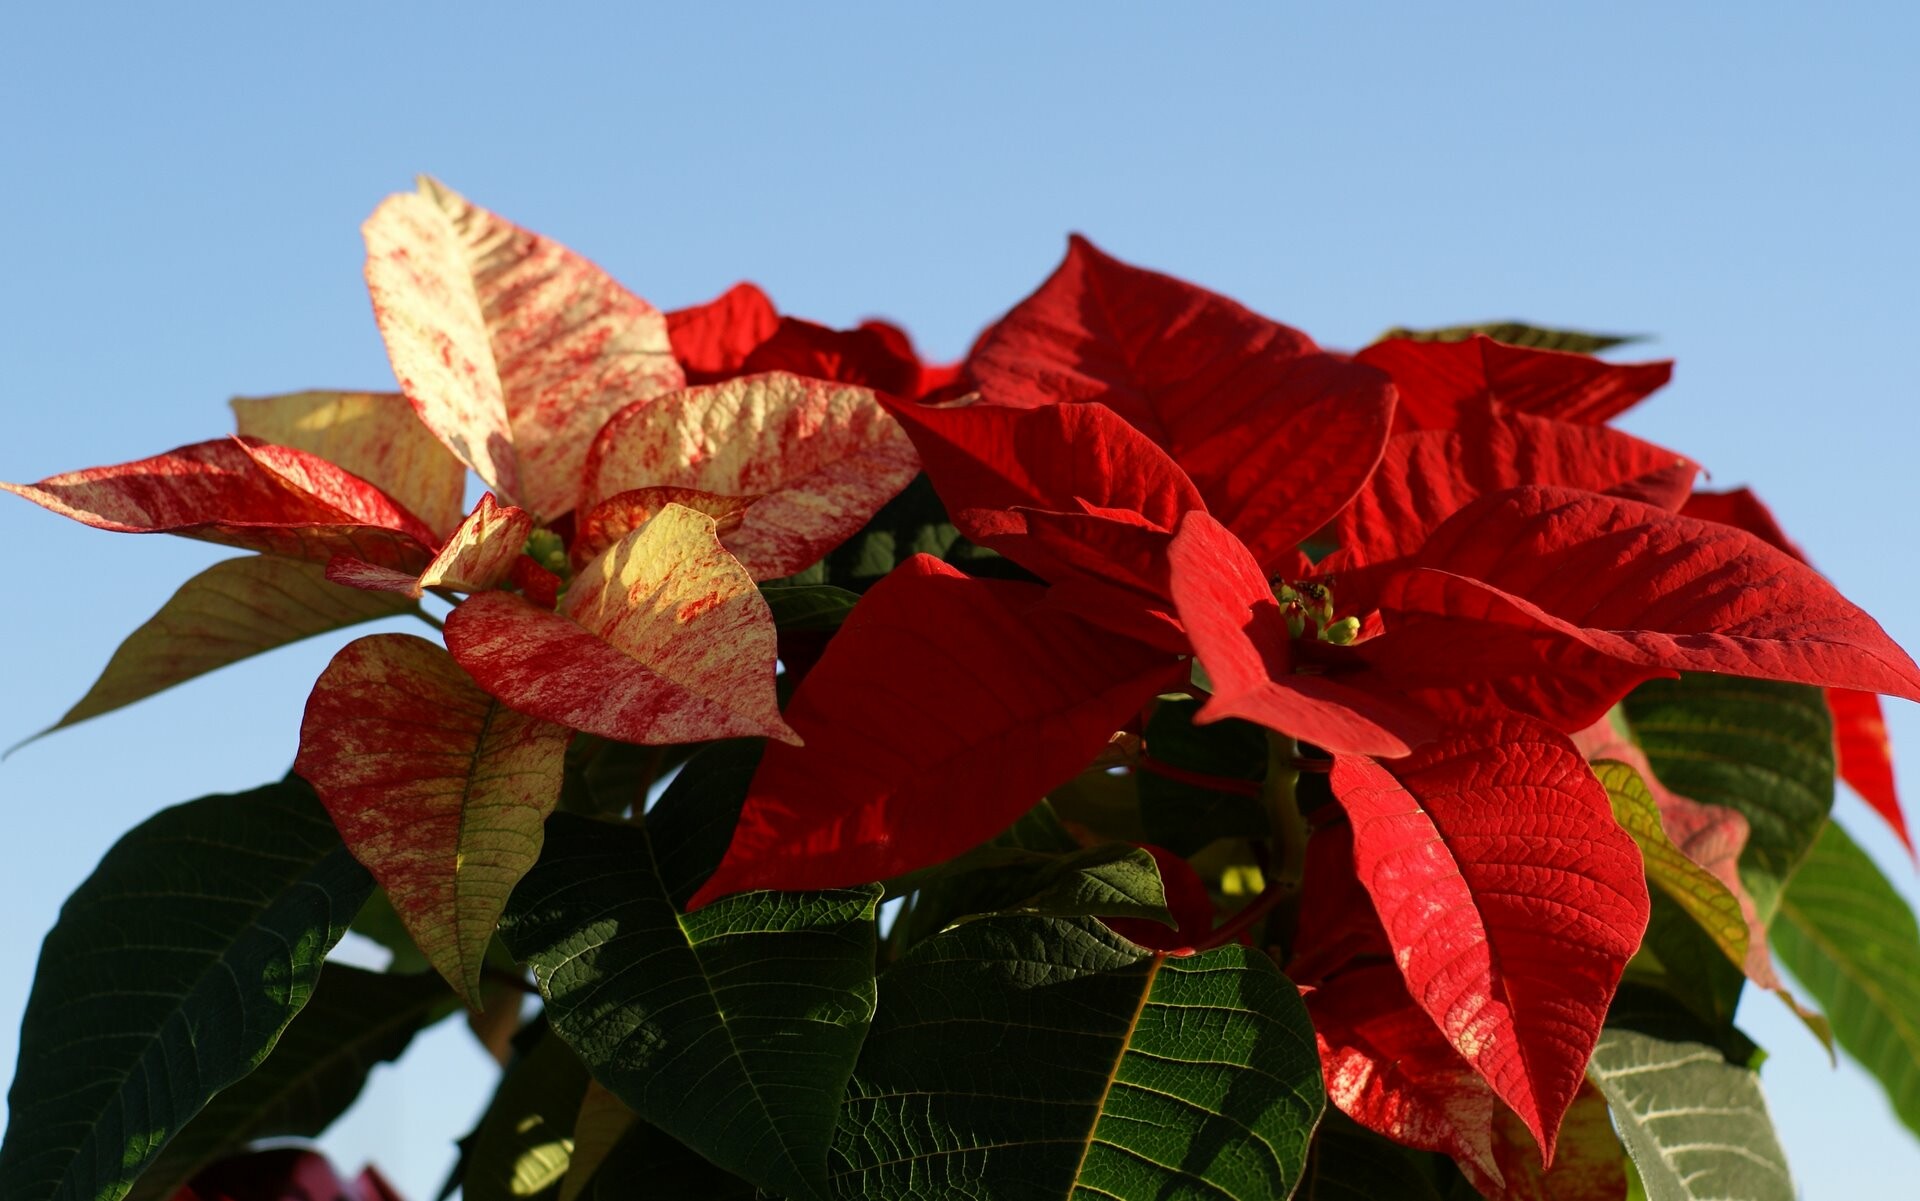 Poinsettia: A well-known member of the spurge family, commonly sold as an ornamental at Christmastime. 1920x1210 HD Wallpaper.